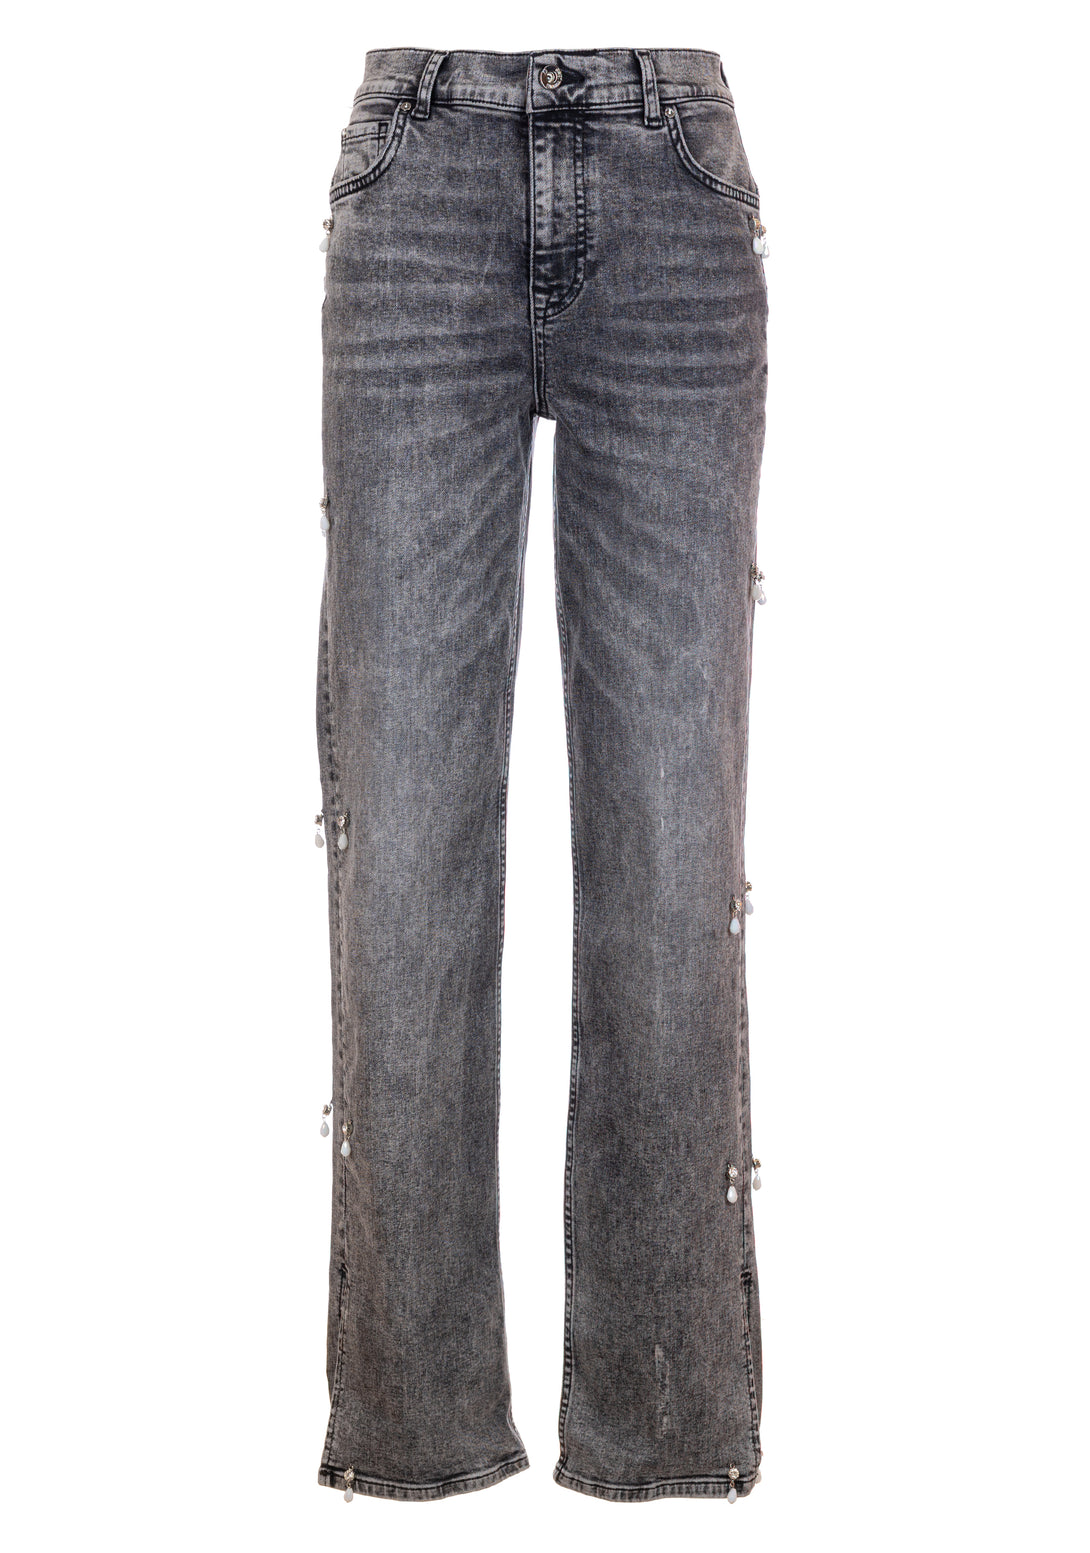 Jeans regular fit made in grey denim with strong wash